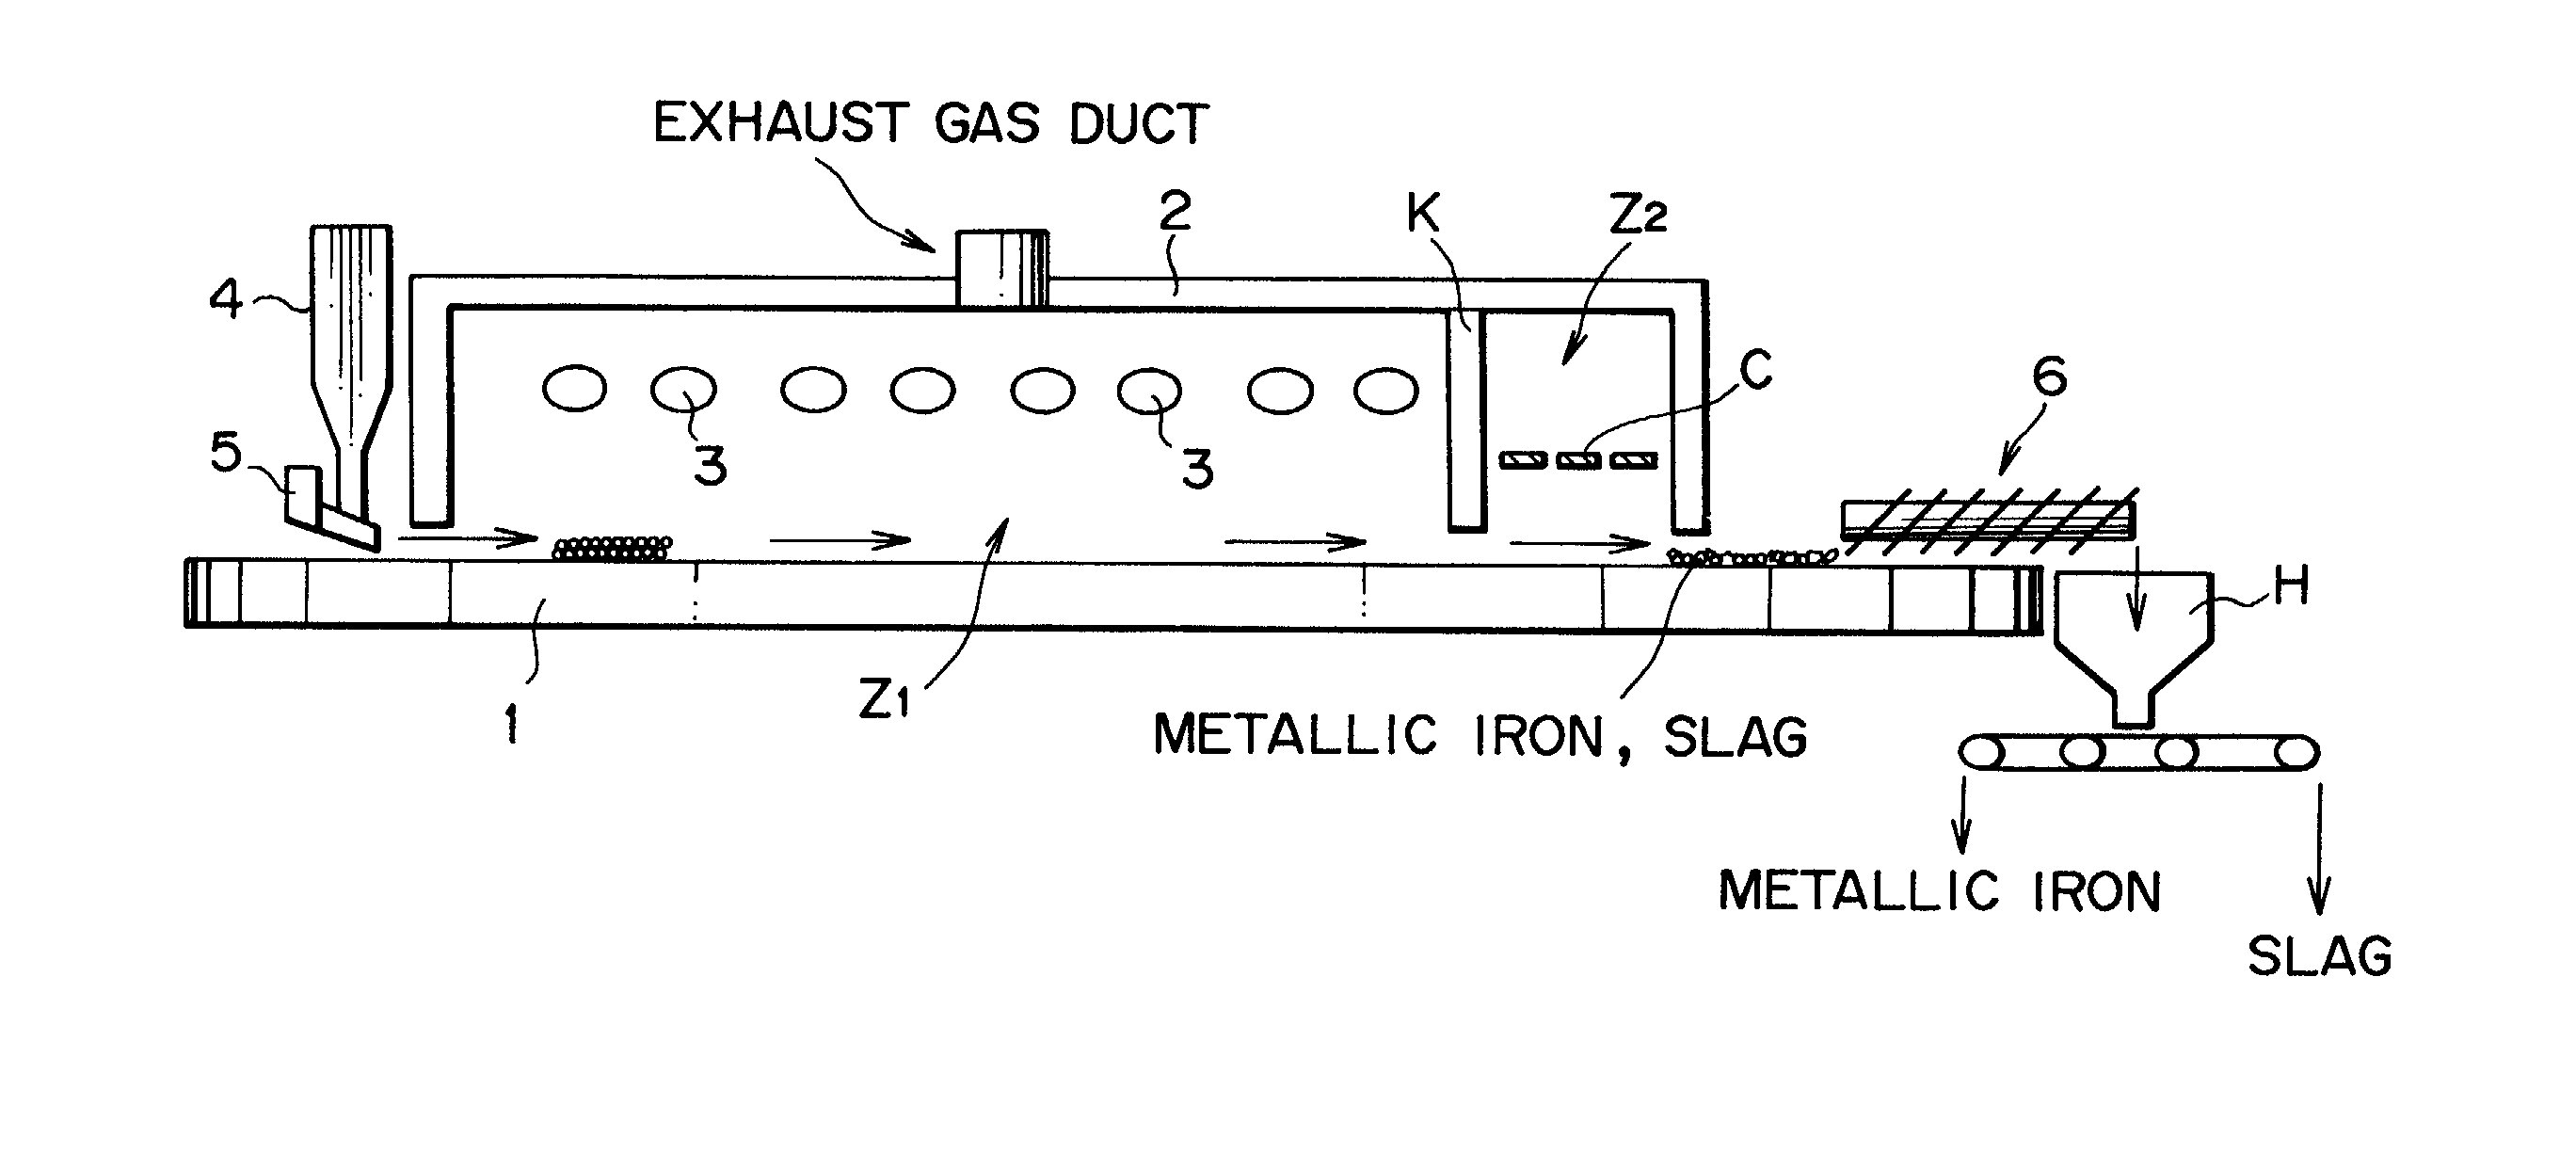 Method of producing iron nuggets